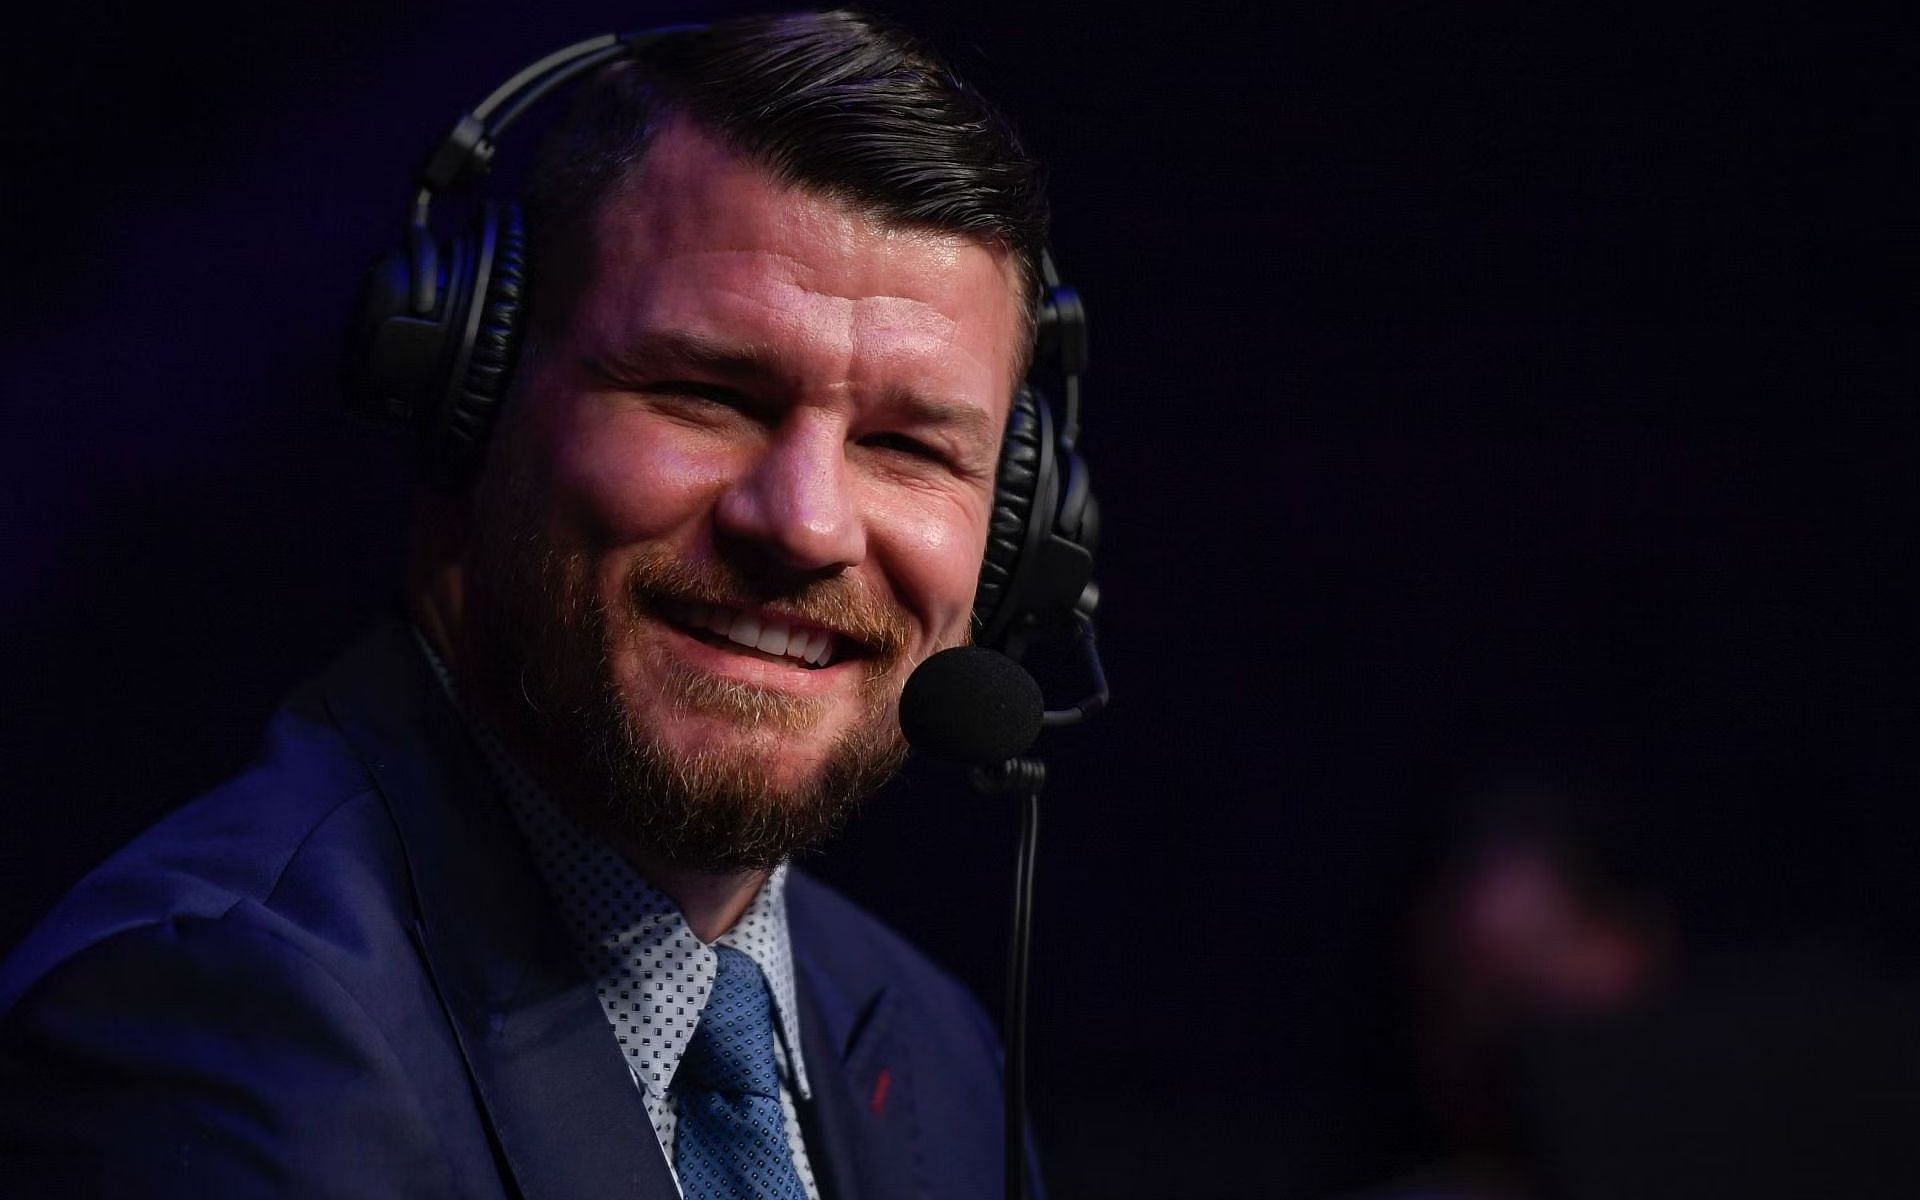 Which fighter at UFC 290 does Michael Bisping see as a future champion? [Image Credit: Getty]